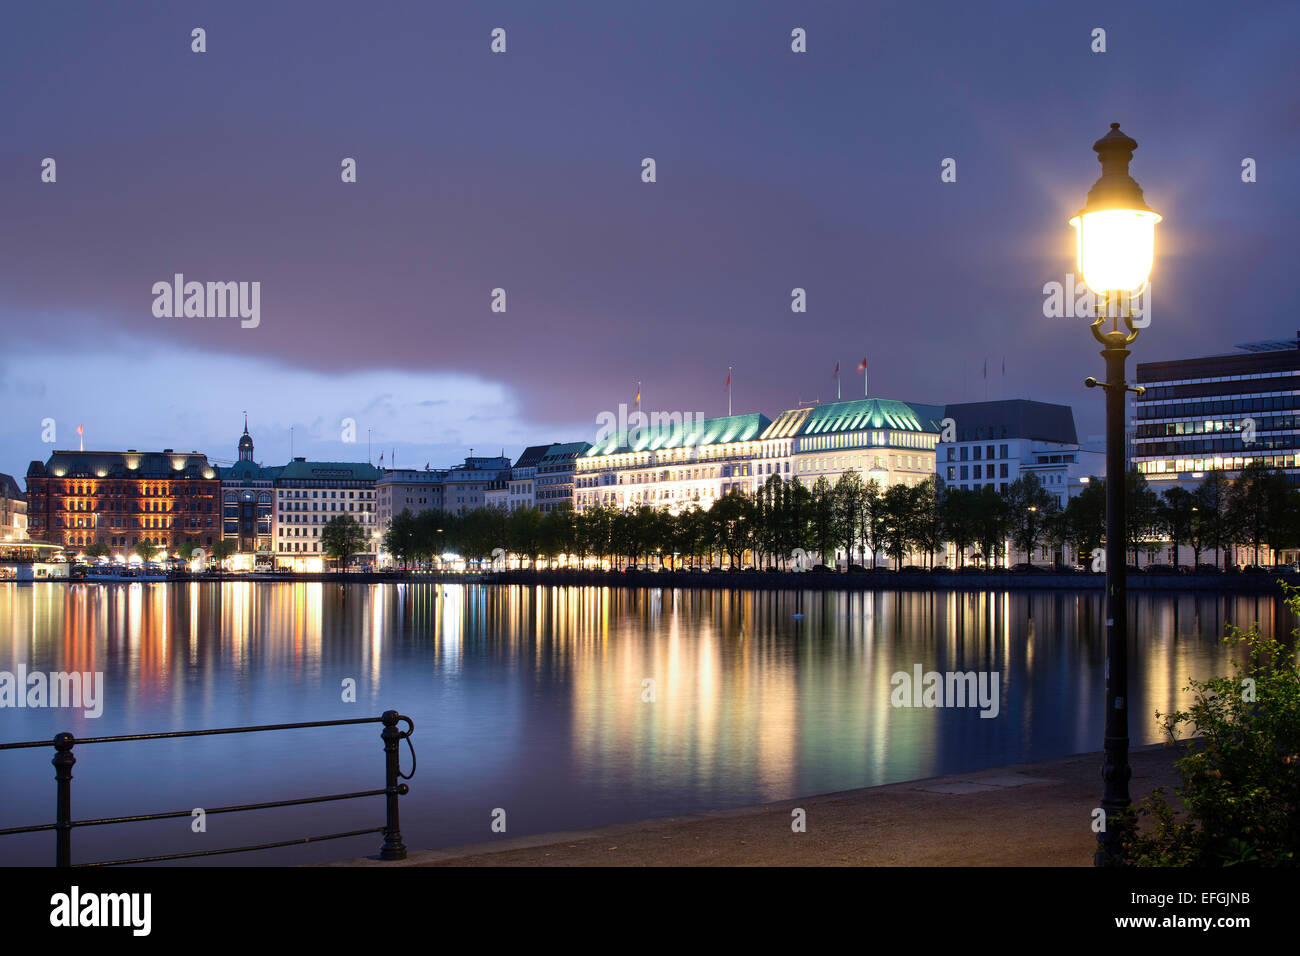 View across the Inner Alster towards representative office buildings, hotels, and commercial buildings on Jungfernstieg Stock Photo